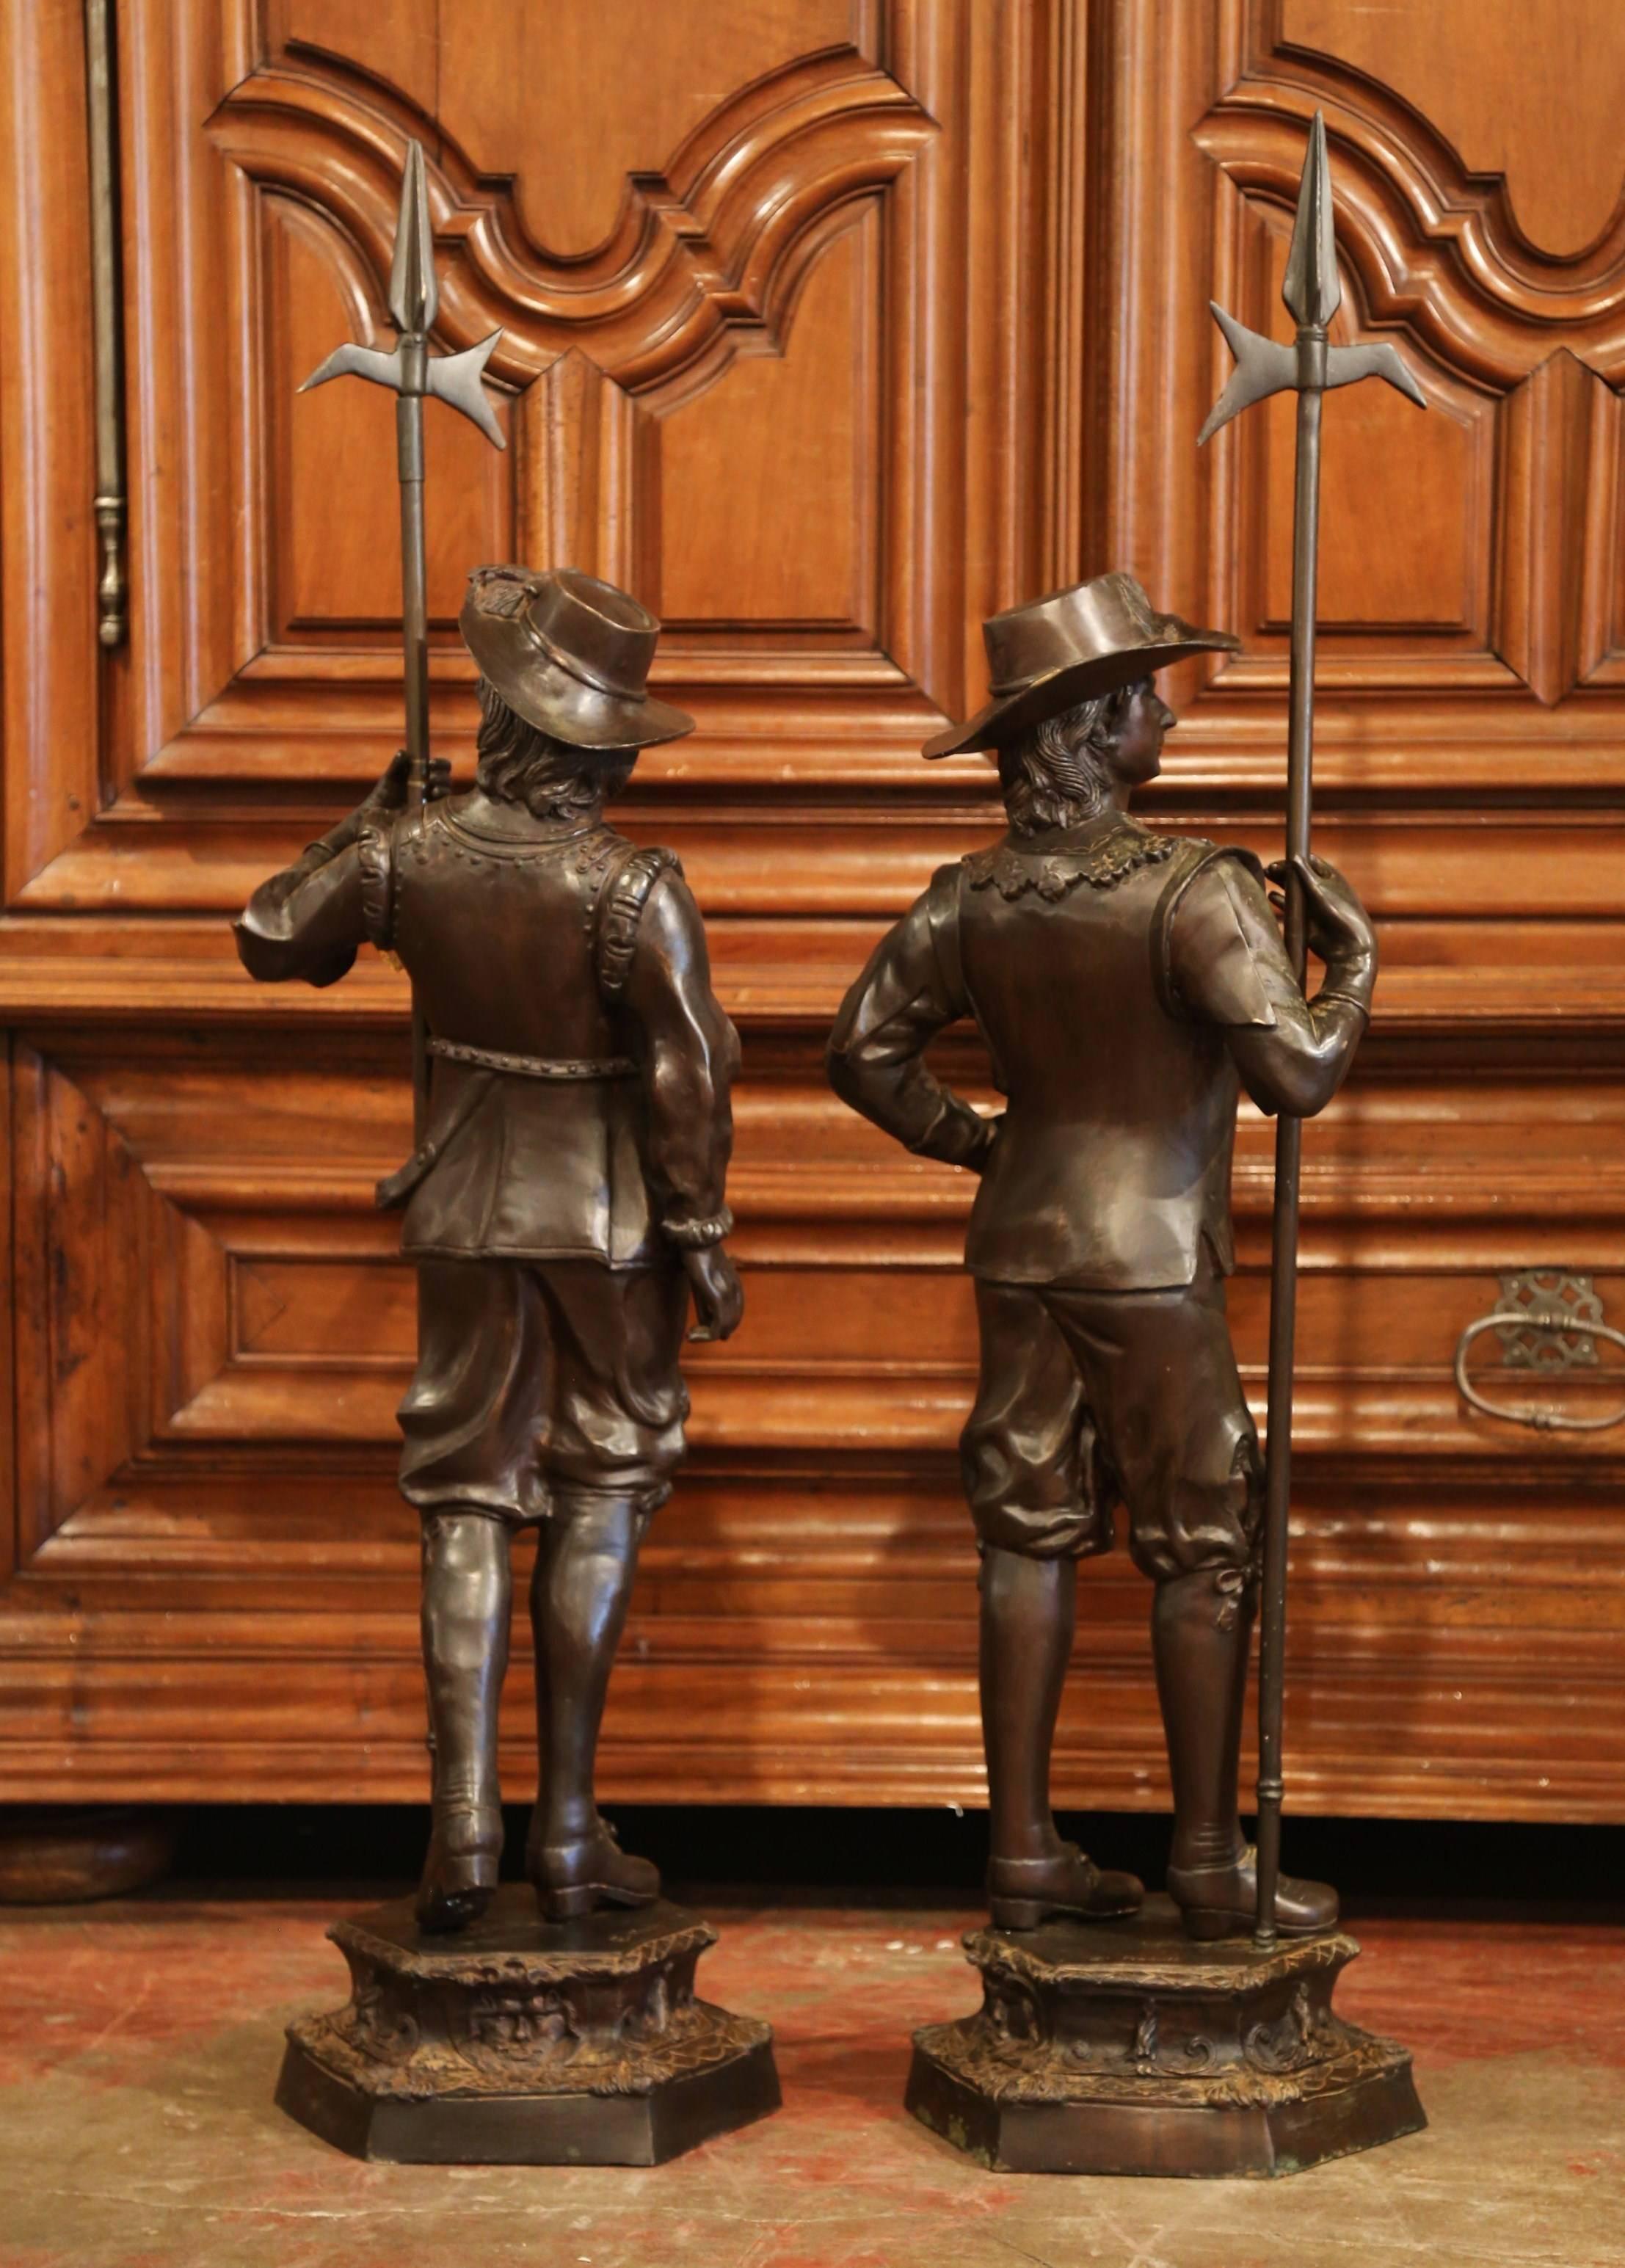 Pair of 19th Century French Patinated Musketeers Sculptures Signed E. Picault 2